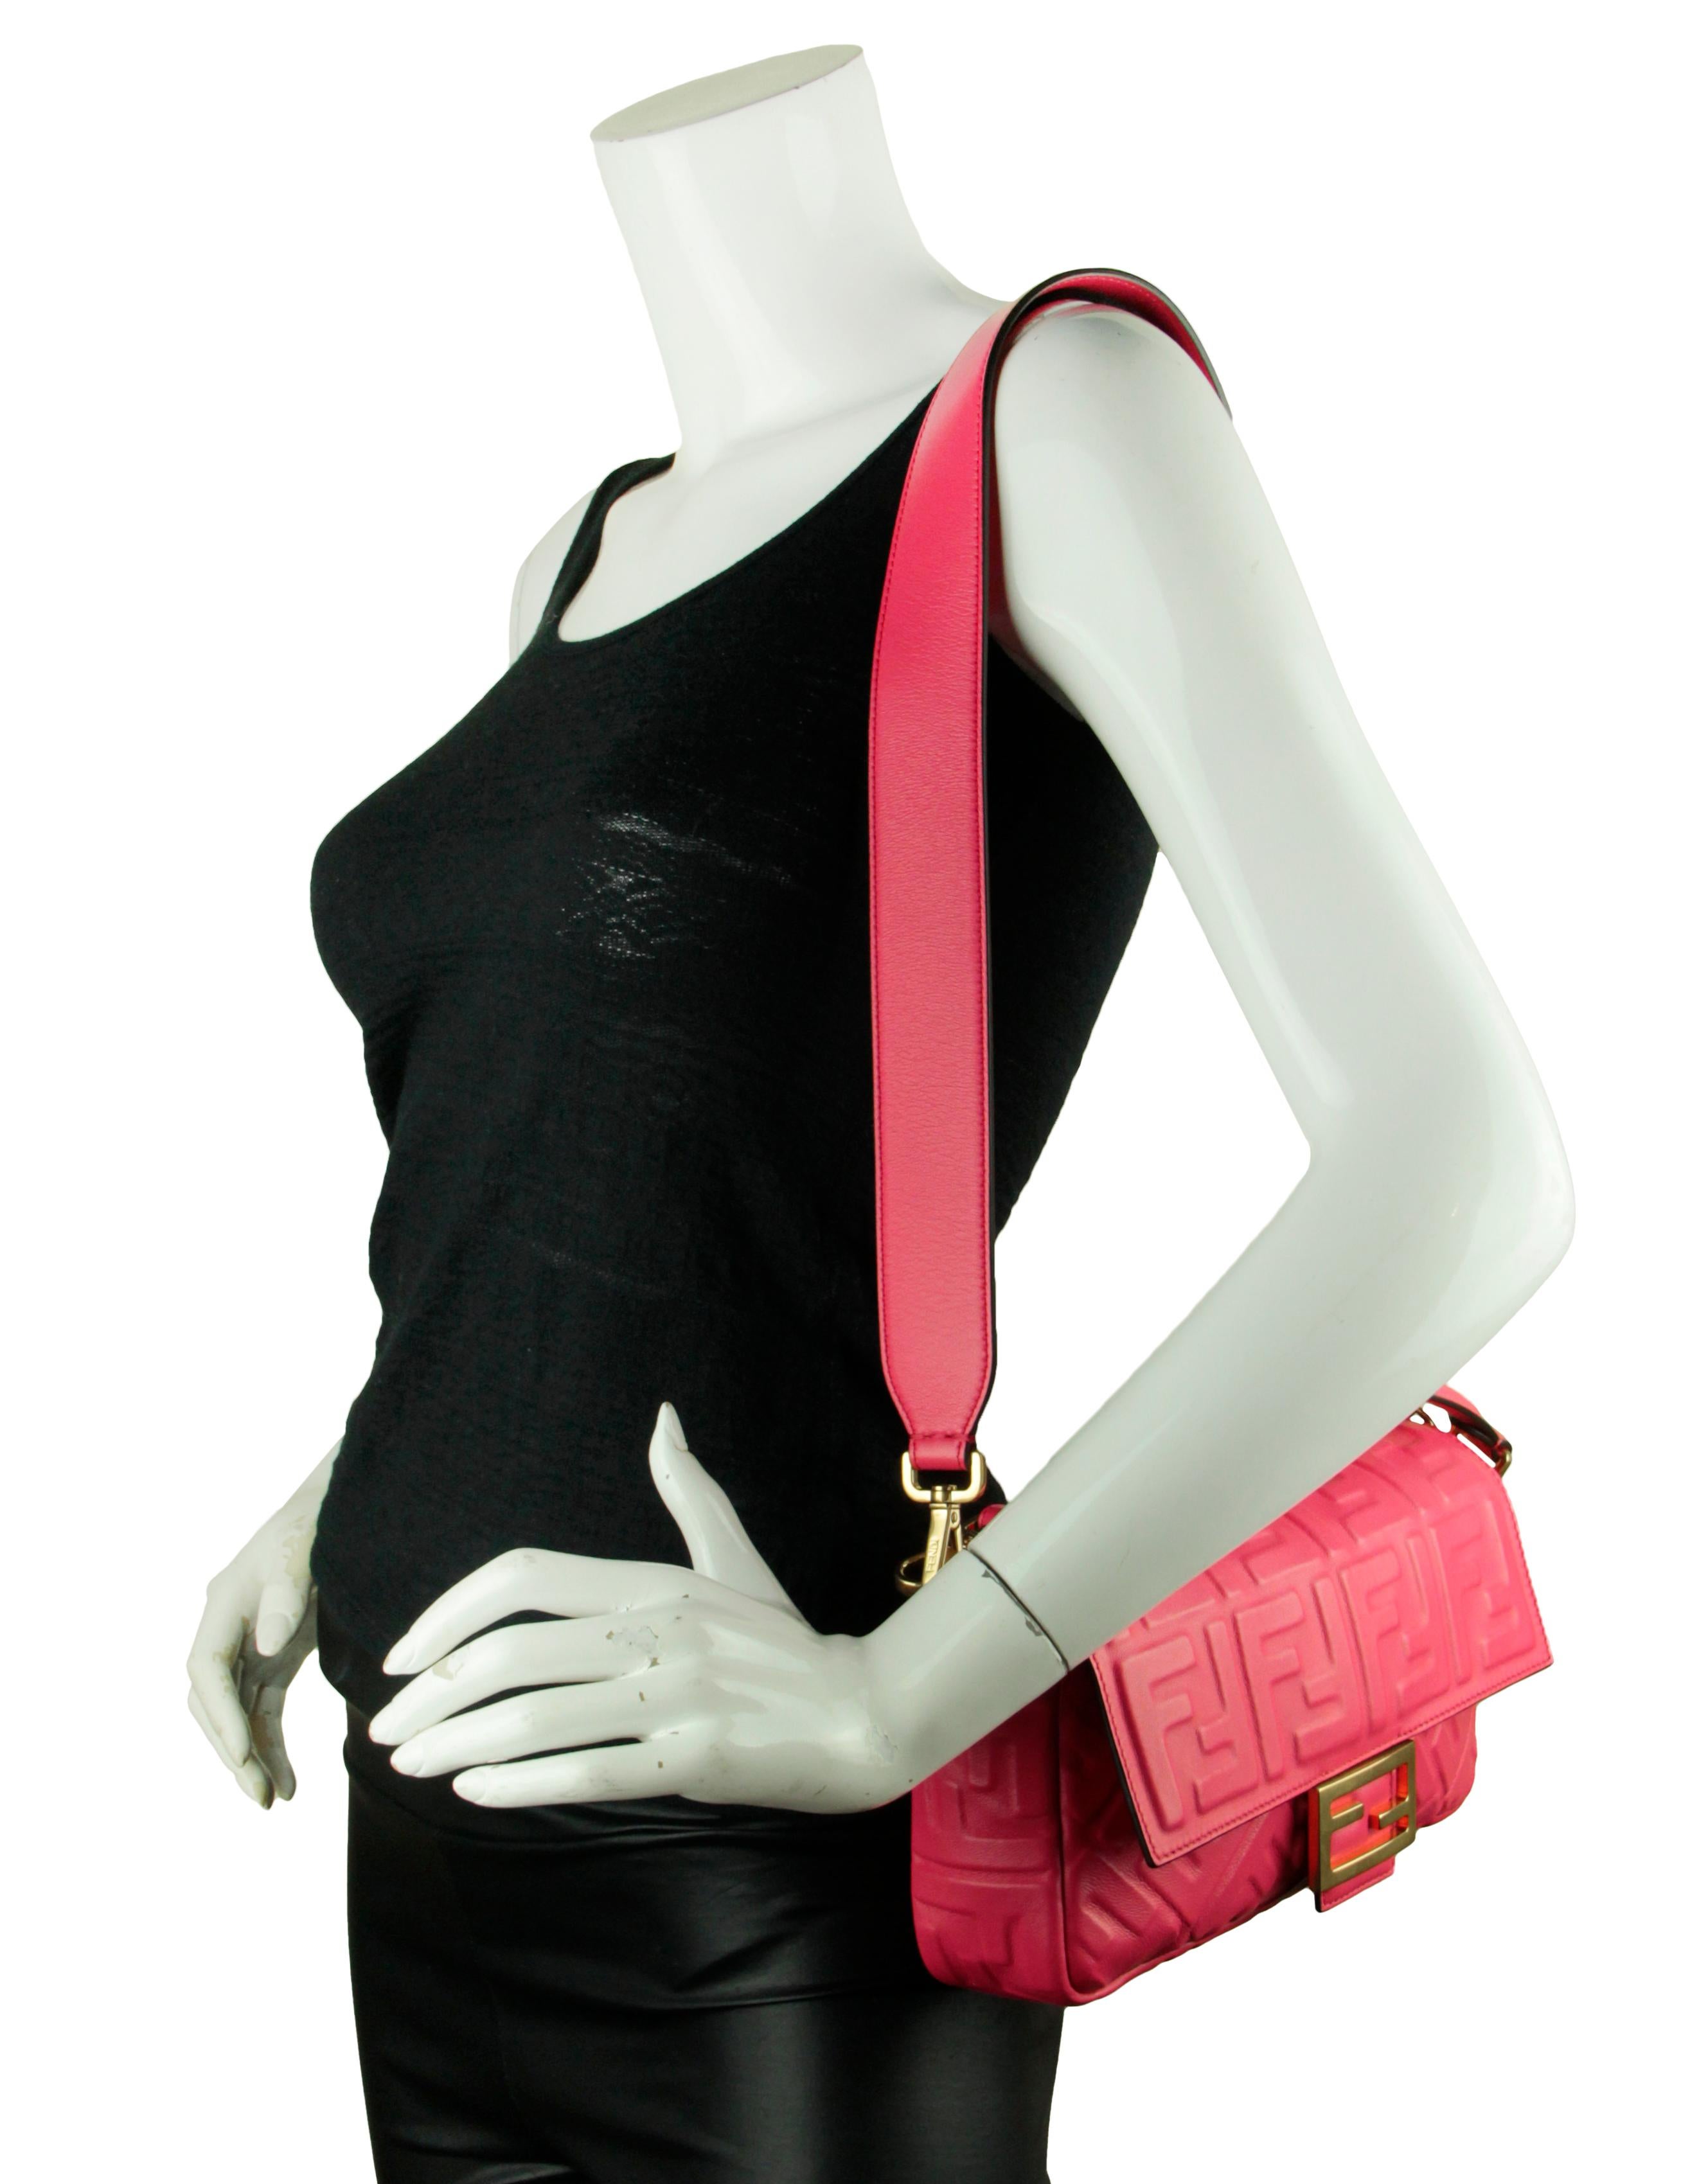 Fendi Pink Nappa Embossed Logo FF 1974 Large Baguette NM Bag w/ Two Straps
Made In: Italy
Year of Production: 2022
Color: Lampone pink
Hardware: Goldtone
Materials: Nappa leather
Lining: Textile
Closure/Opening: Flap top with magnetic